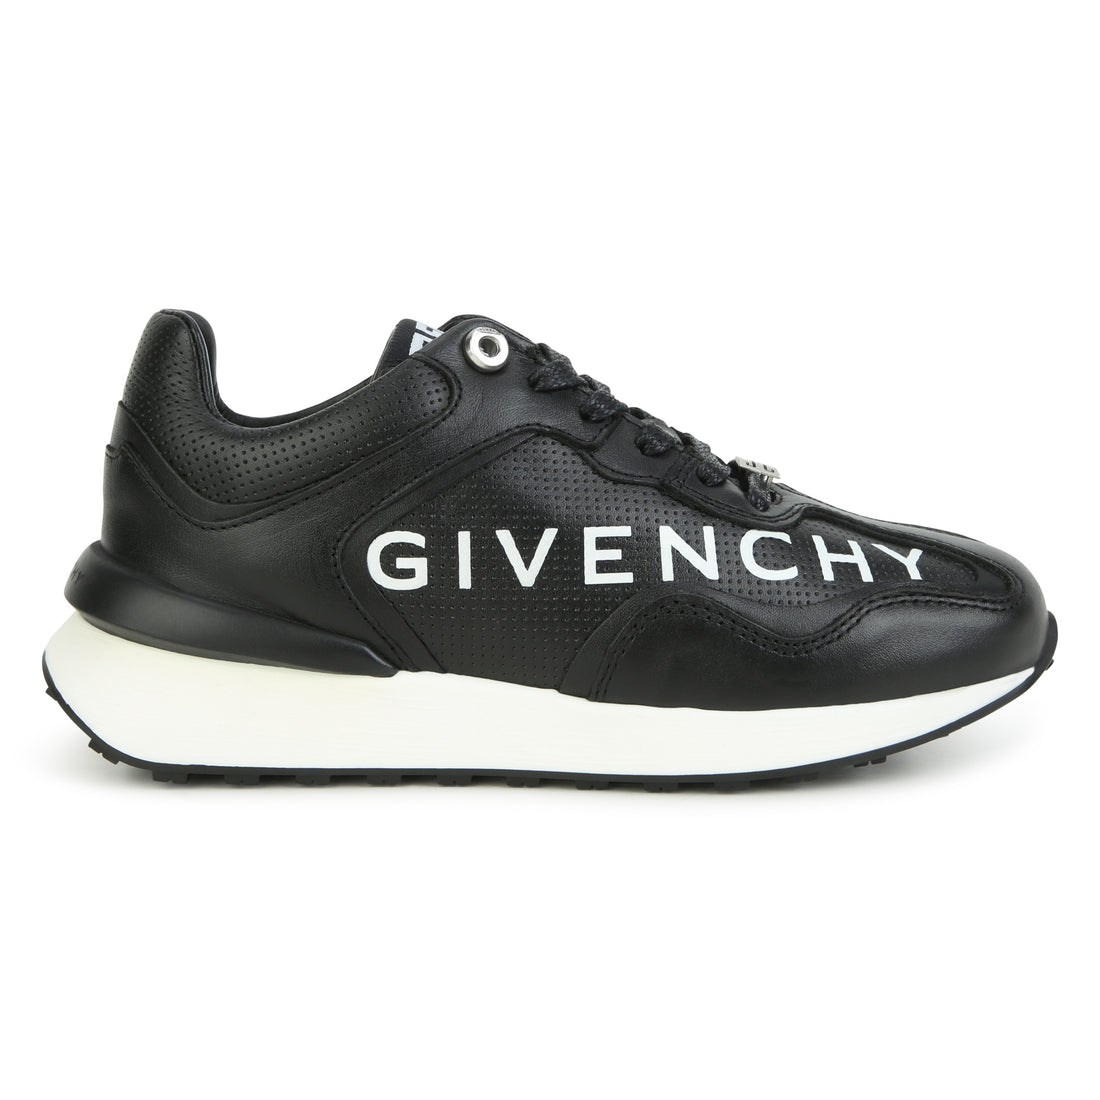 Givenchy Trainers Style: H29096